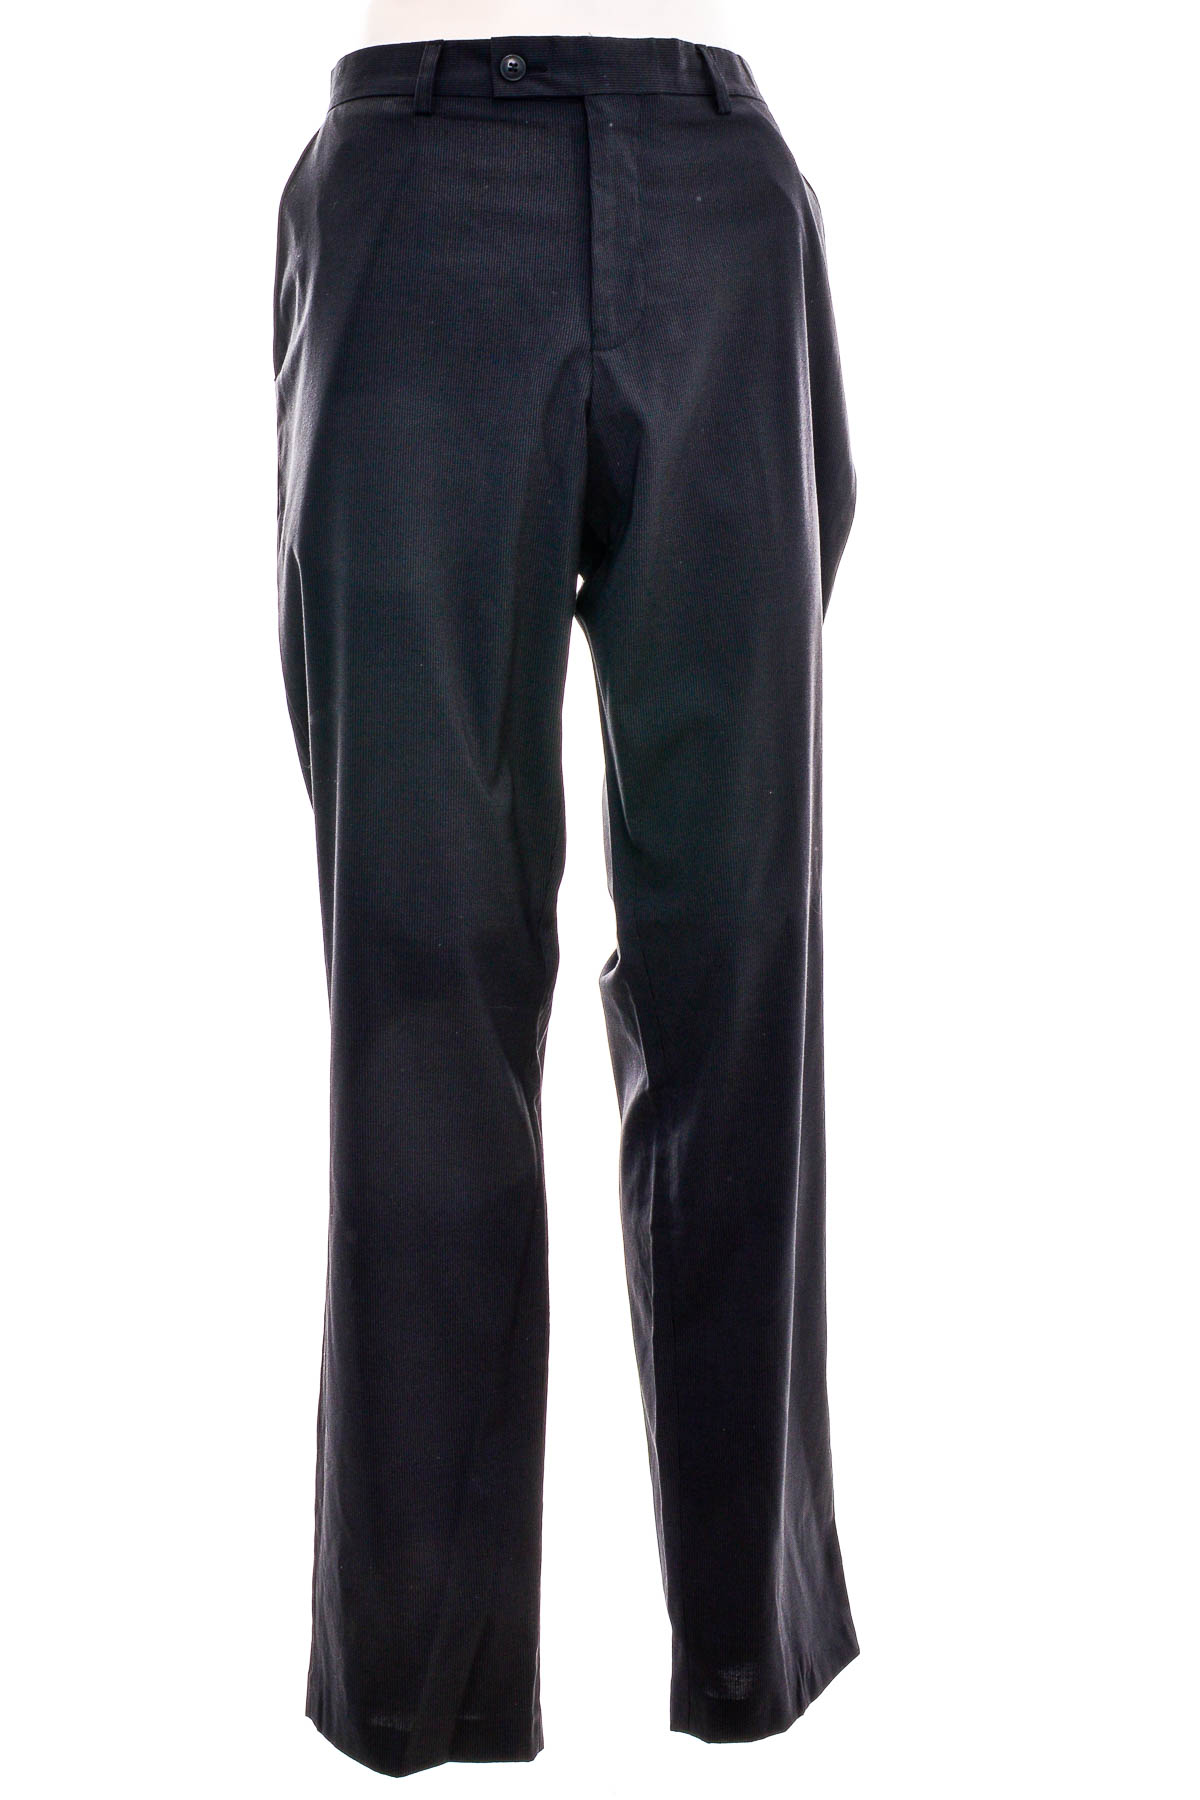 Men's trousers - Angelo Litrico - 0